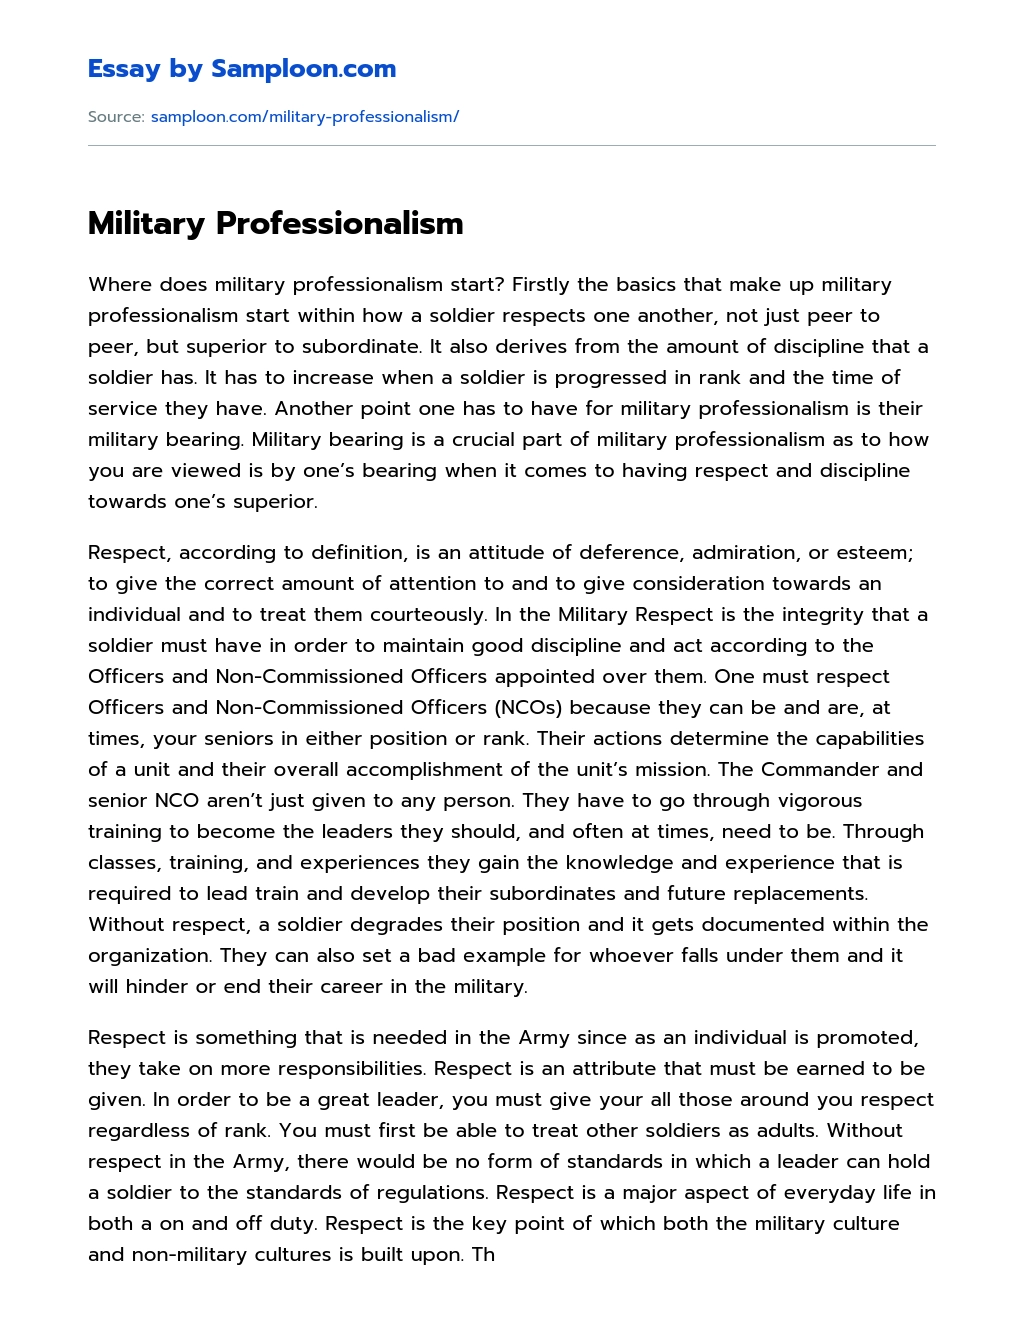 title for a military essay